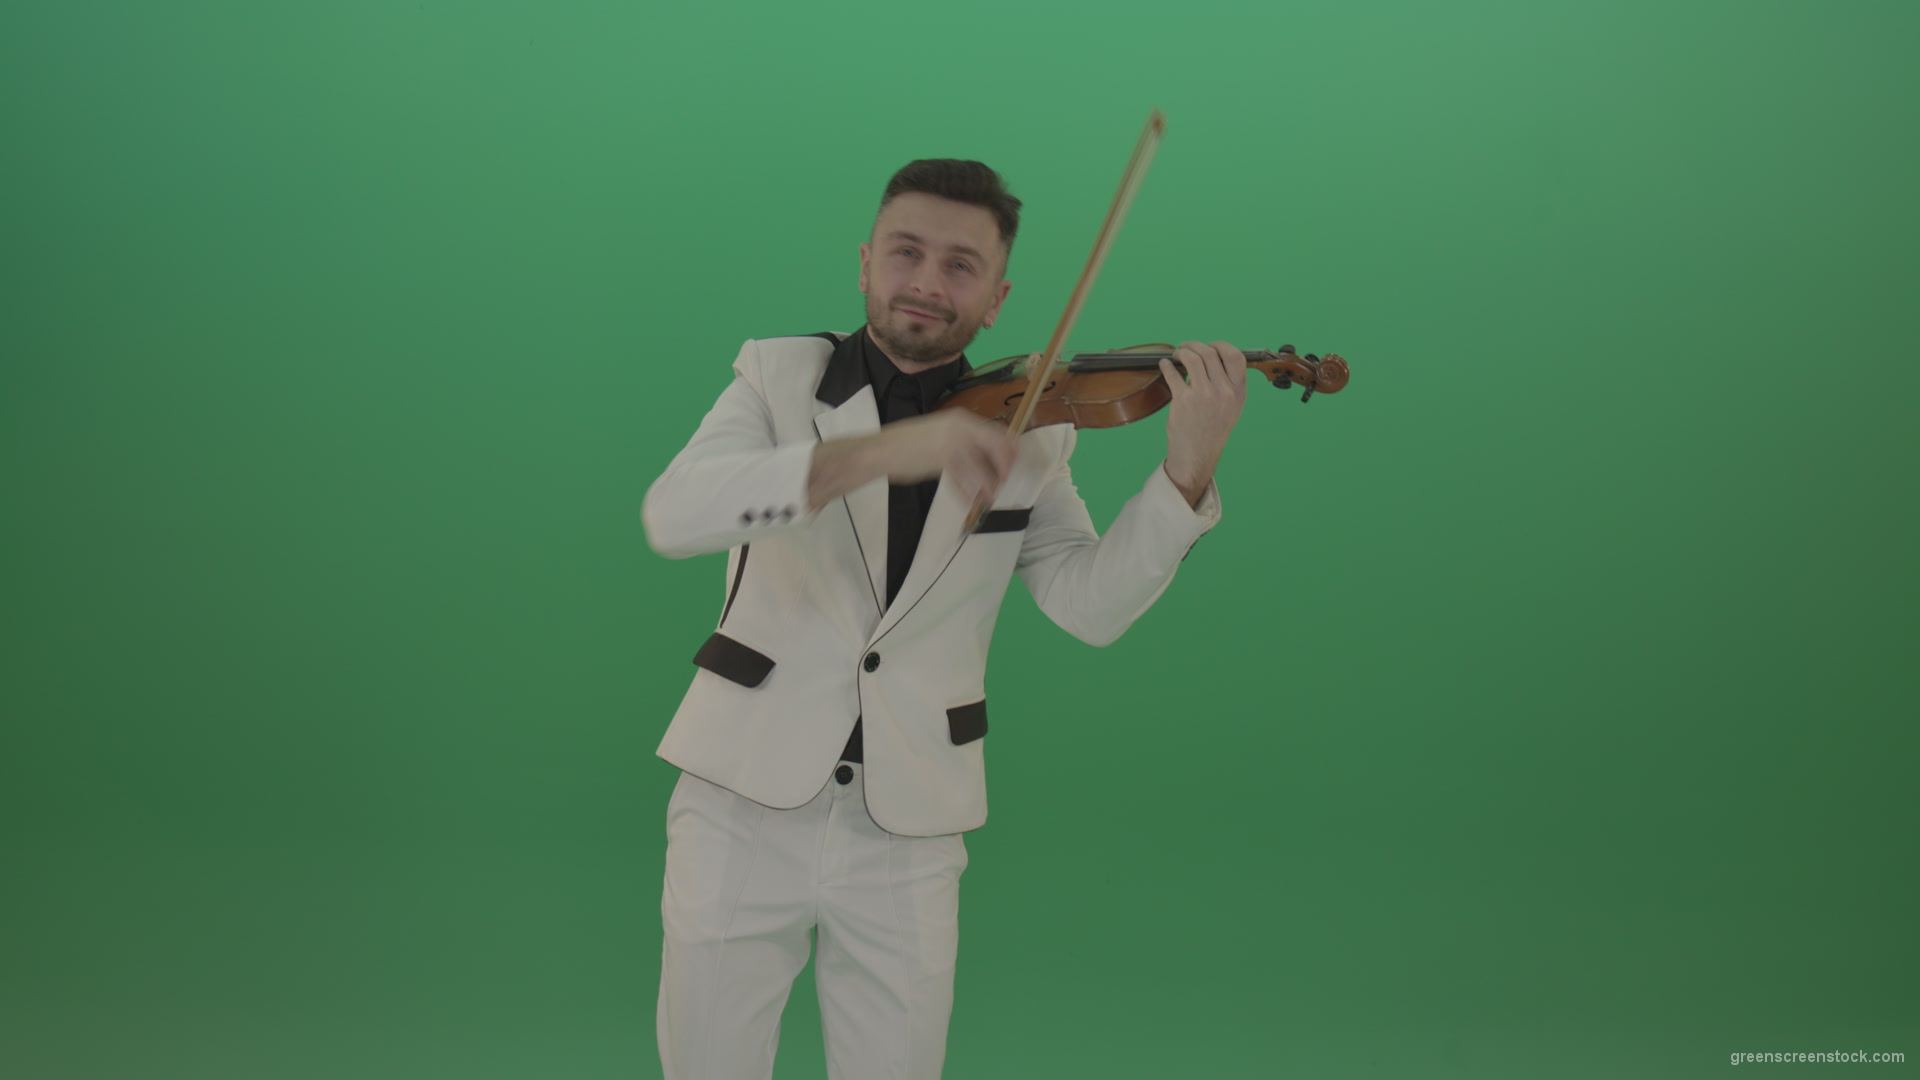 Happy-man-in-white-costume-dramatic-playing-violin-music-instrument-isolated-on-green-screen_009 Green Screen Stock